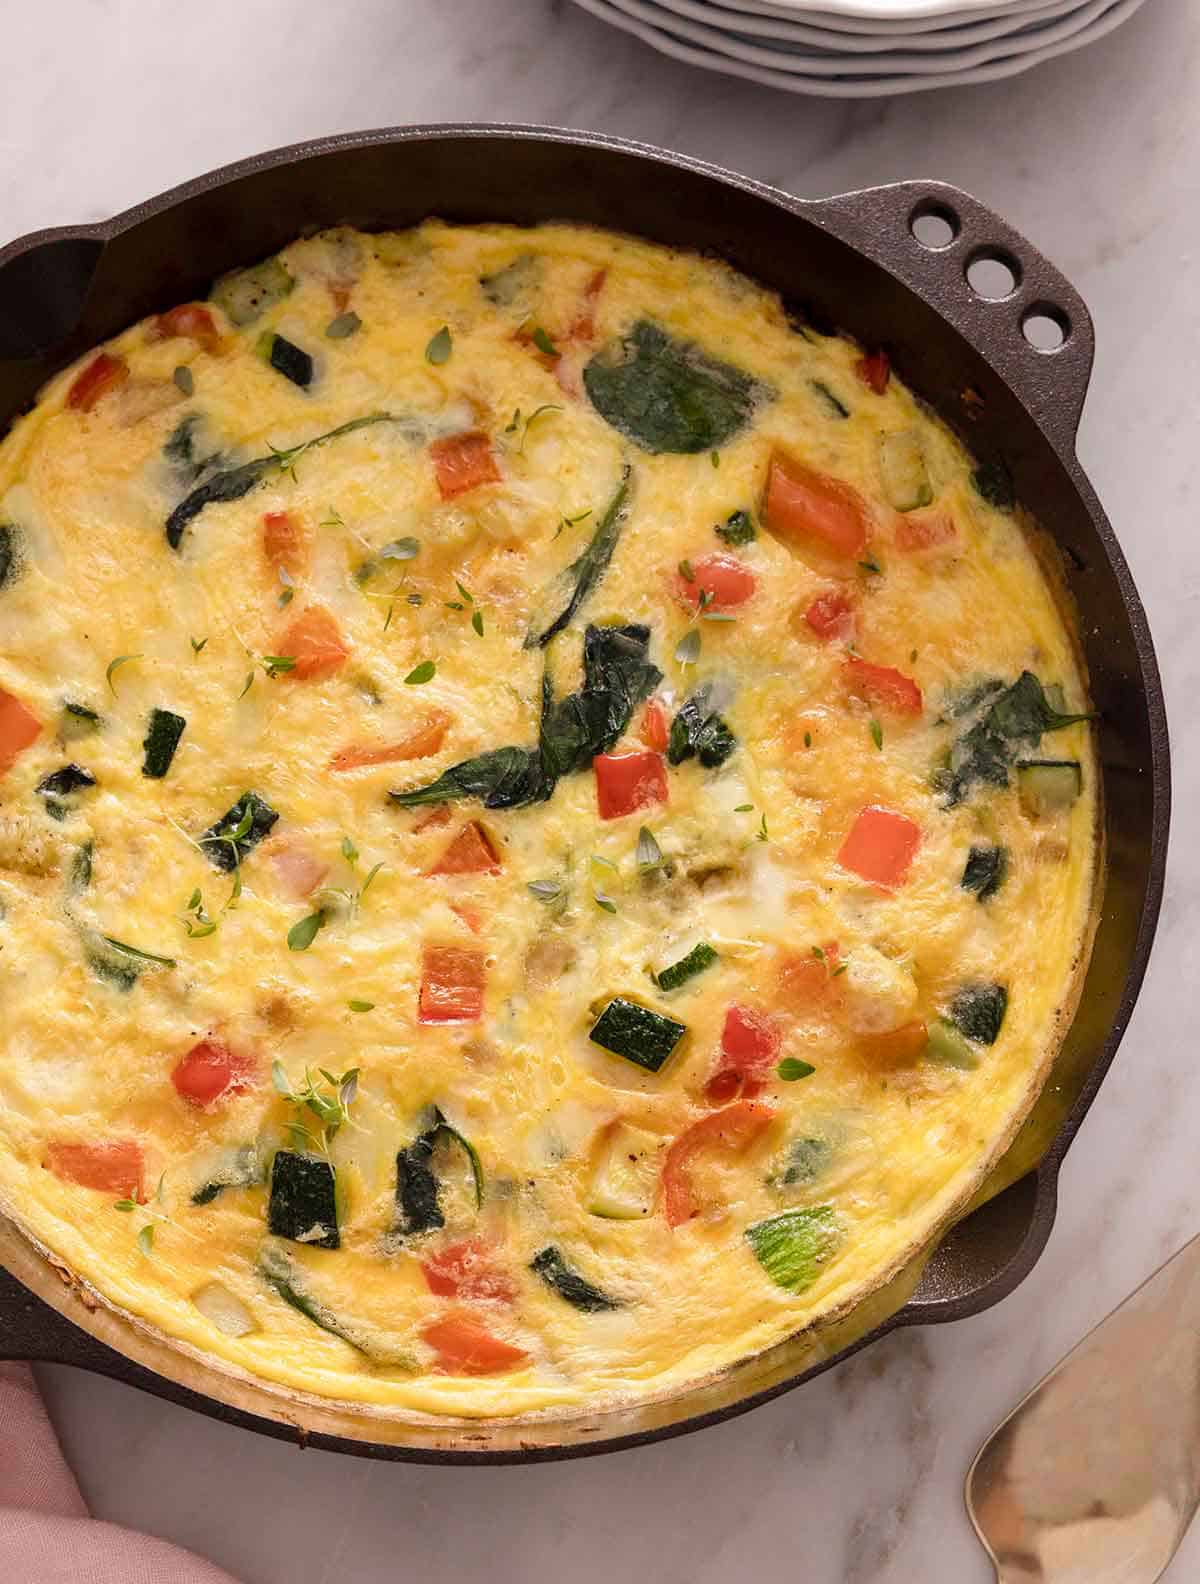 Overhead view of a cast iron pan containing a frittata.